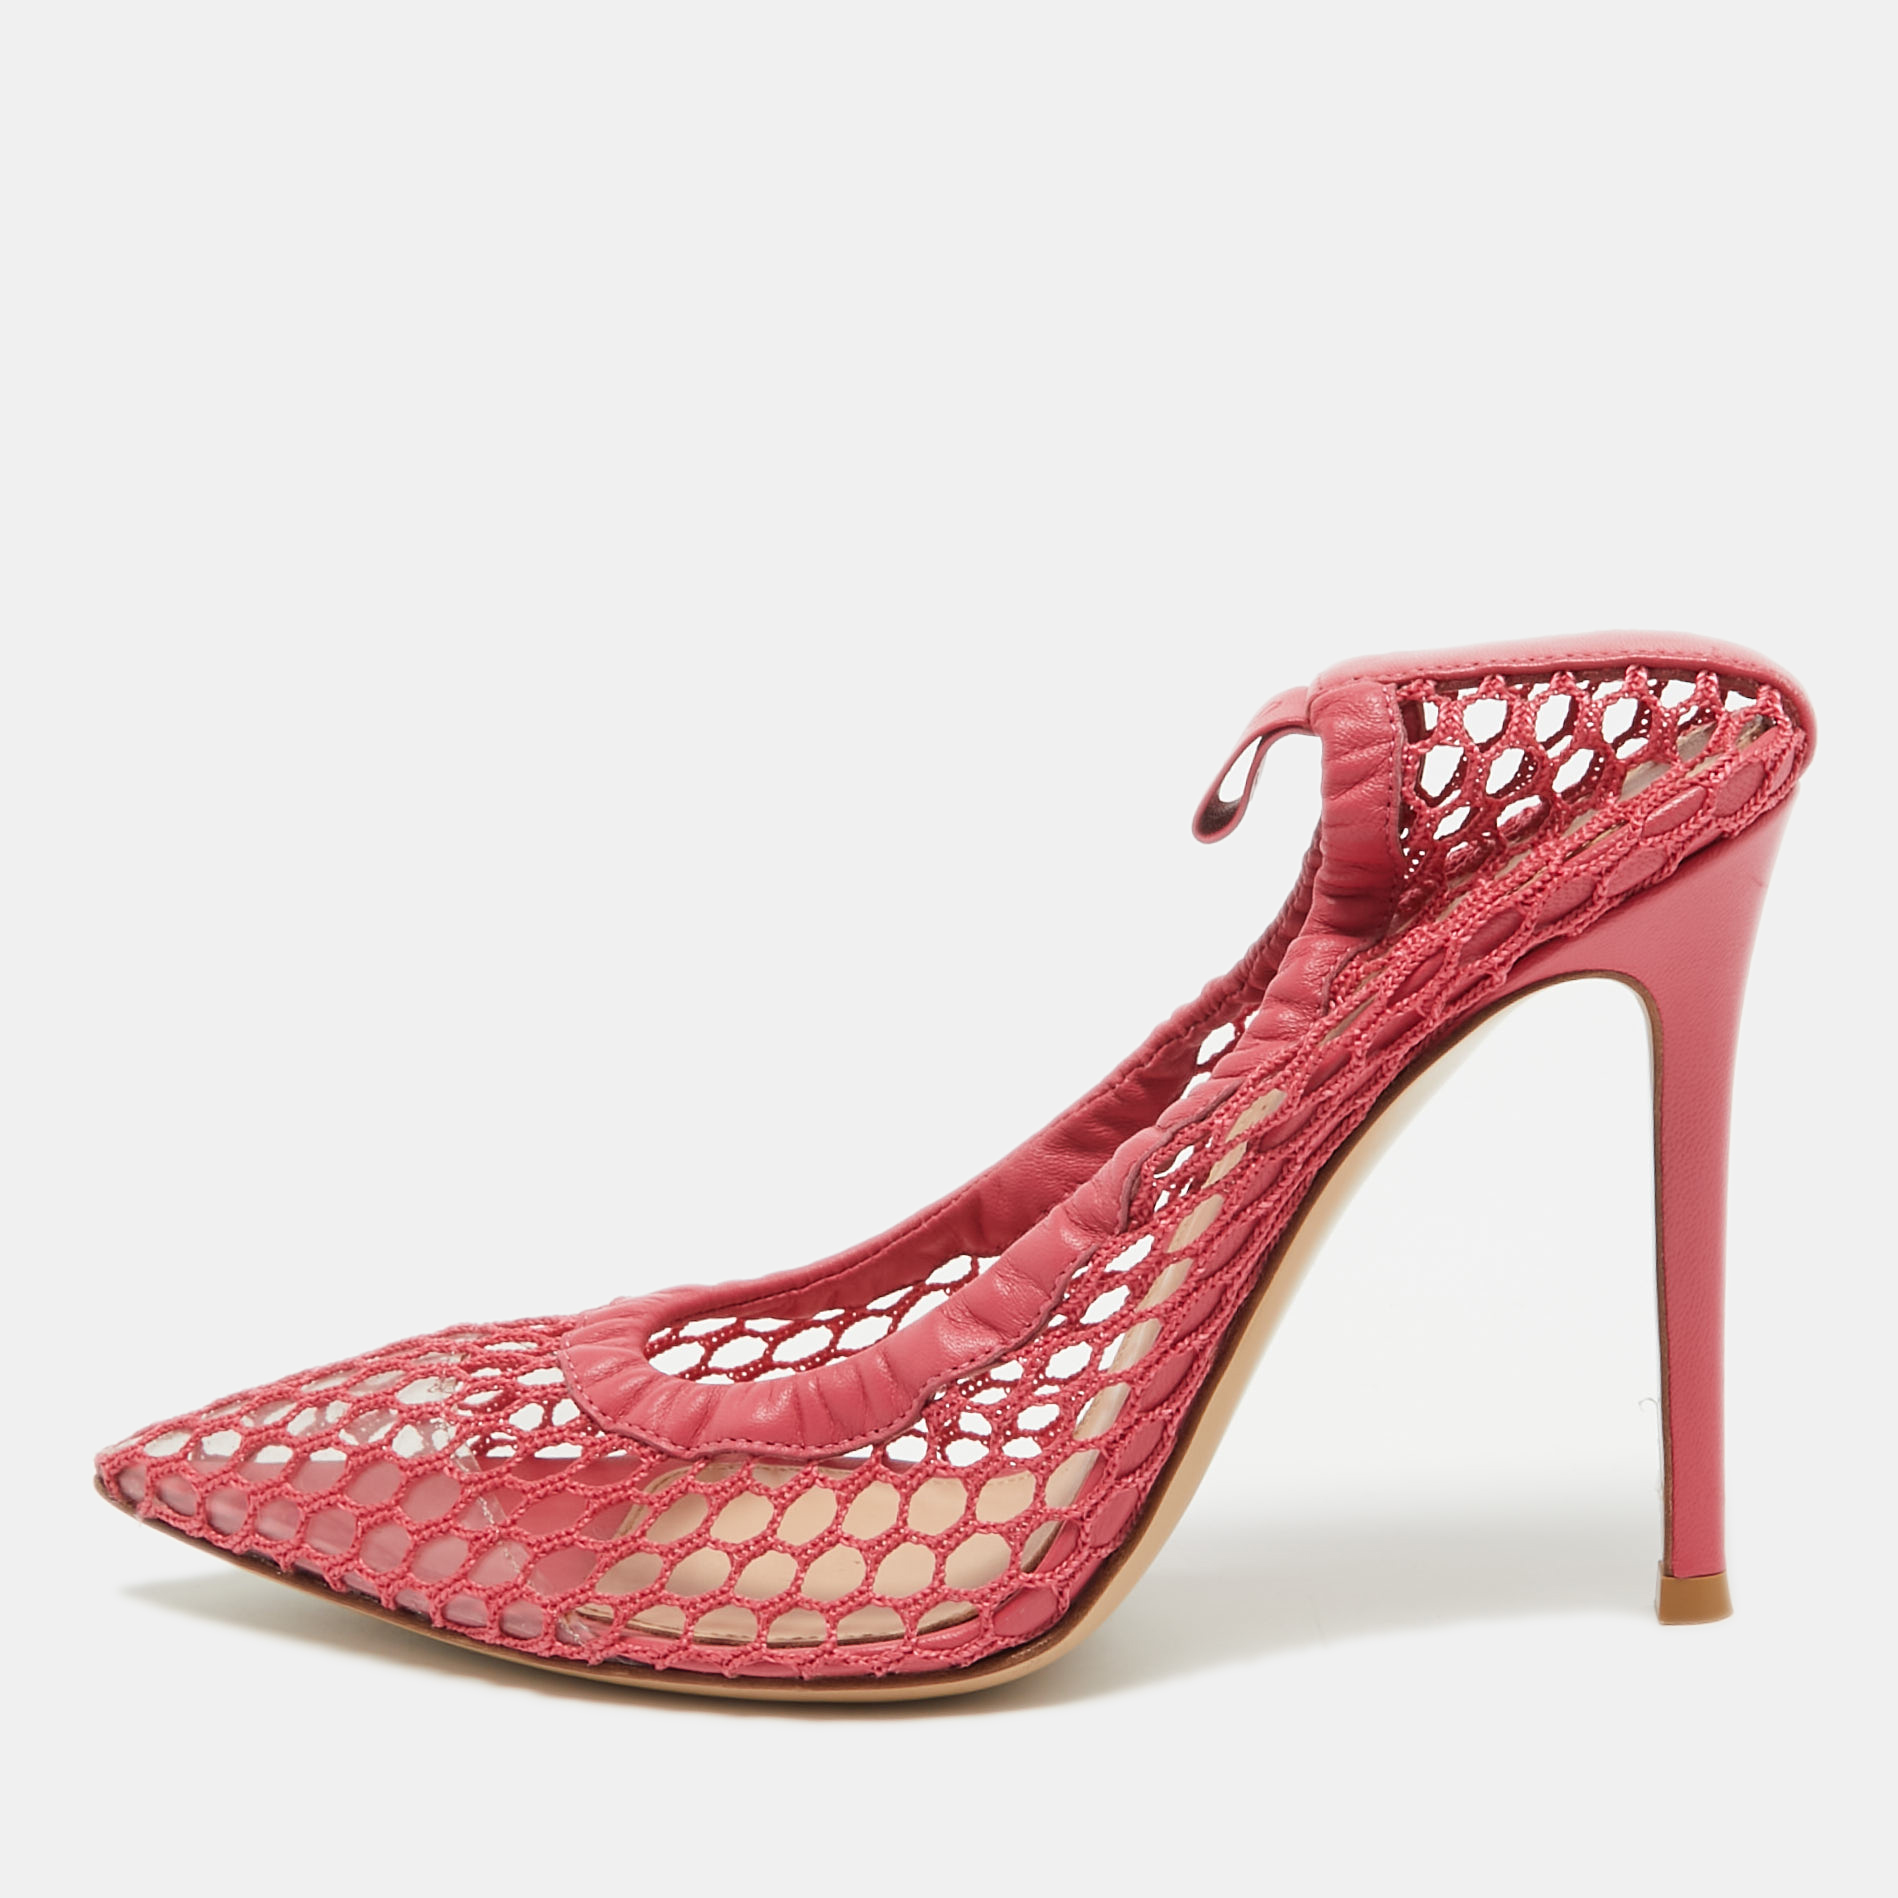 Gianvito rossi pink mesh and leather pumps size 37.5